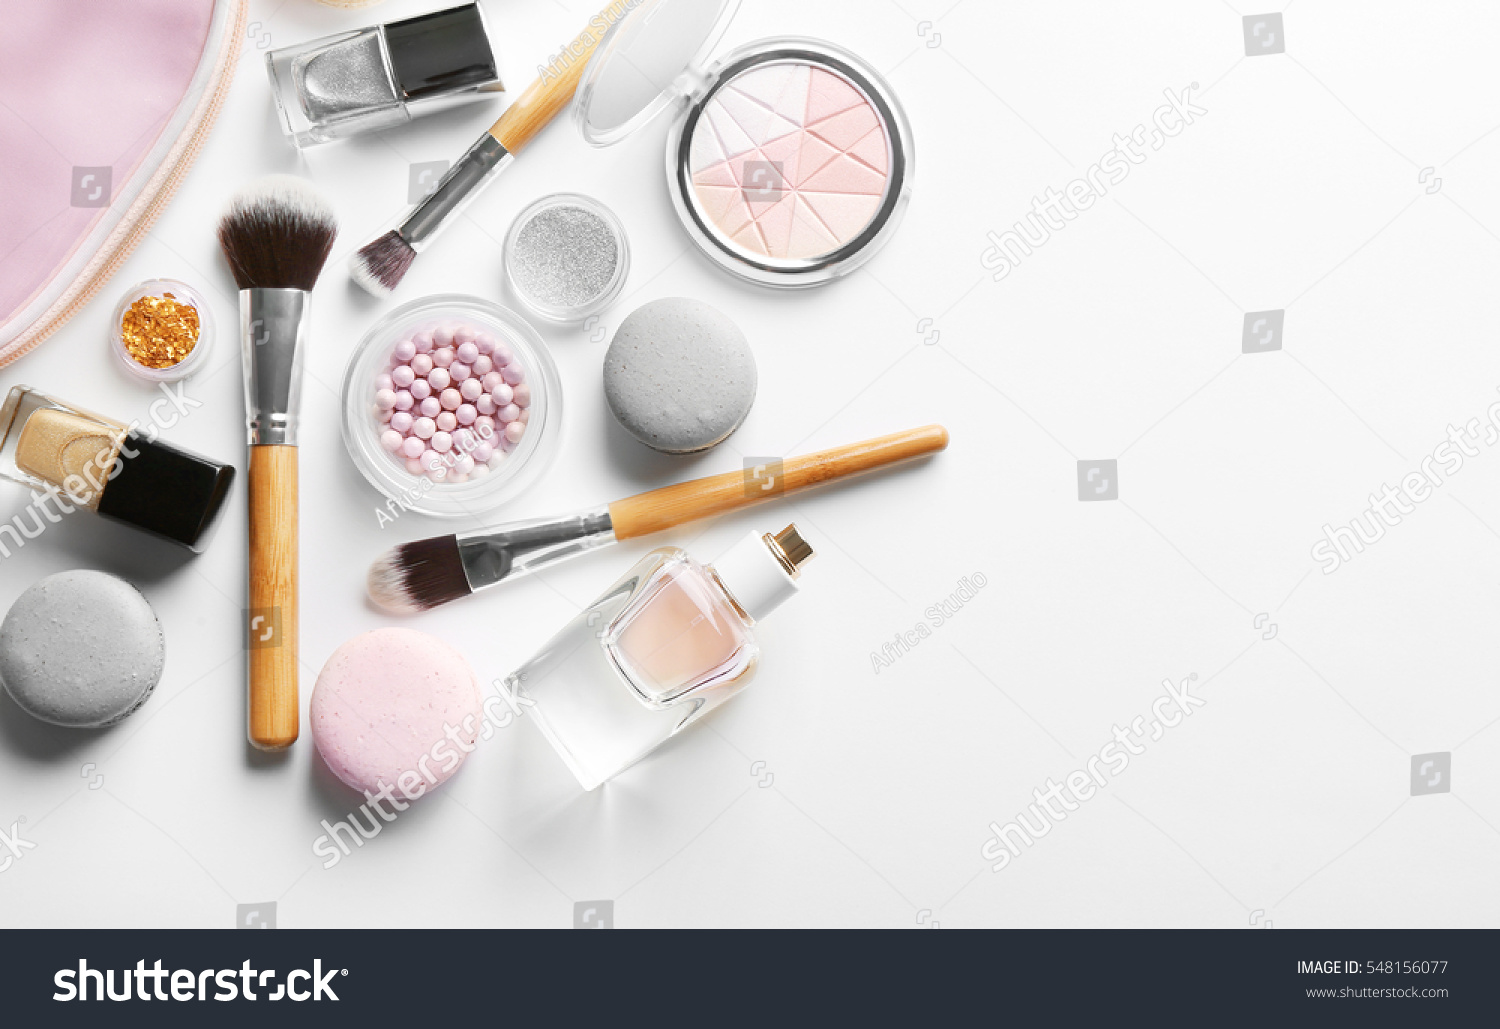 Makeup products with cosmetic bag and macaroons on light background #548156077